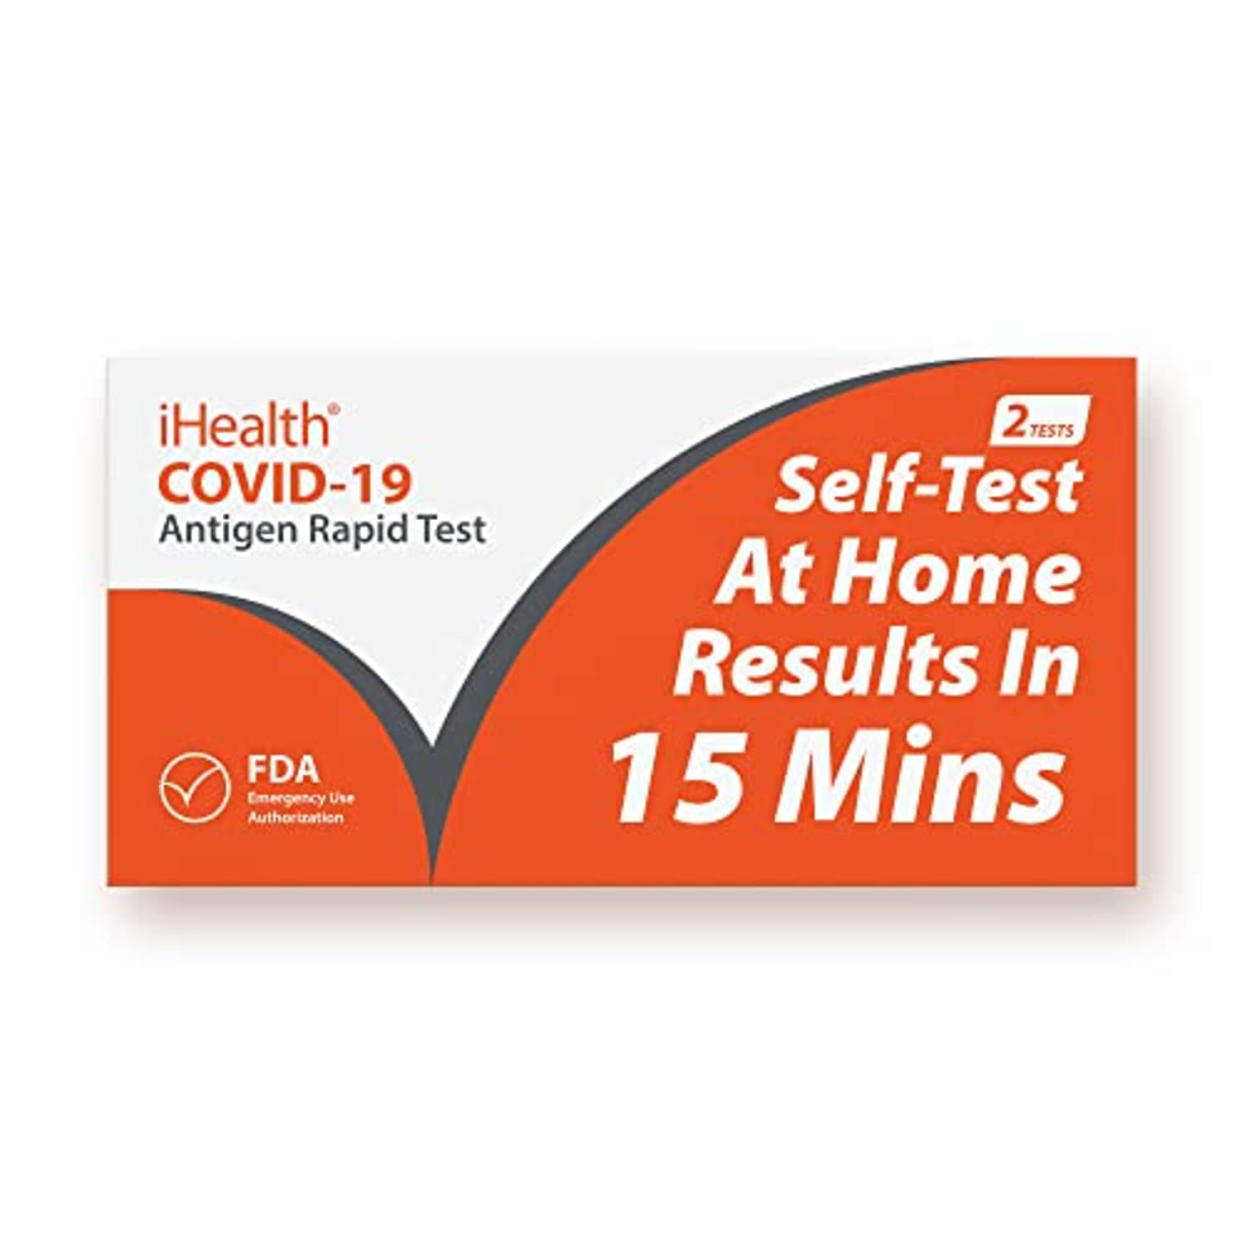 iHealth COVID-19 Antigen Rapid Test, 1 Pack, 2 Tests Total, FDA EUA Authorized OTC at-Home Self Test, Results in 15 Minutes with Non-invasive Nasal Swab, Easy to Use & No Discomfort (AMAZON)